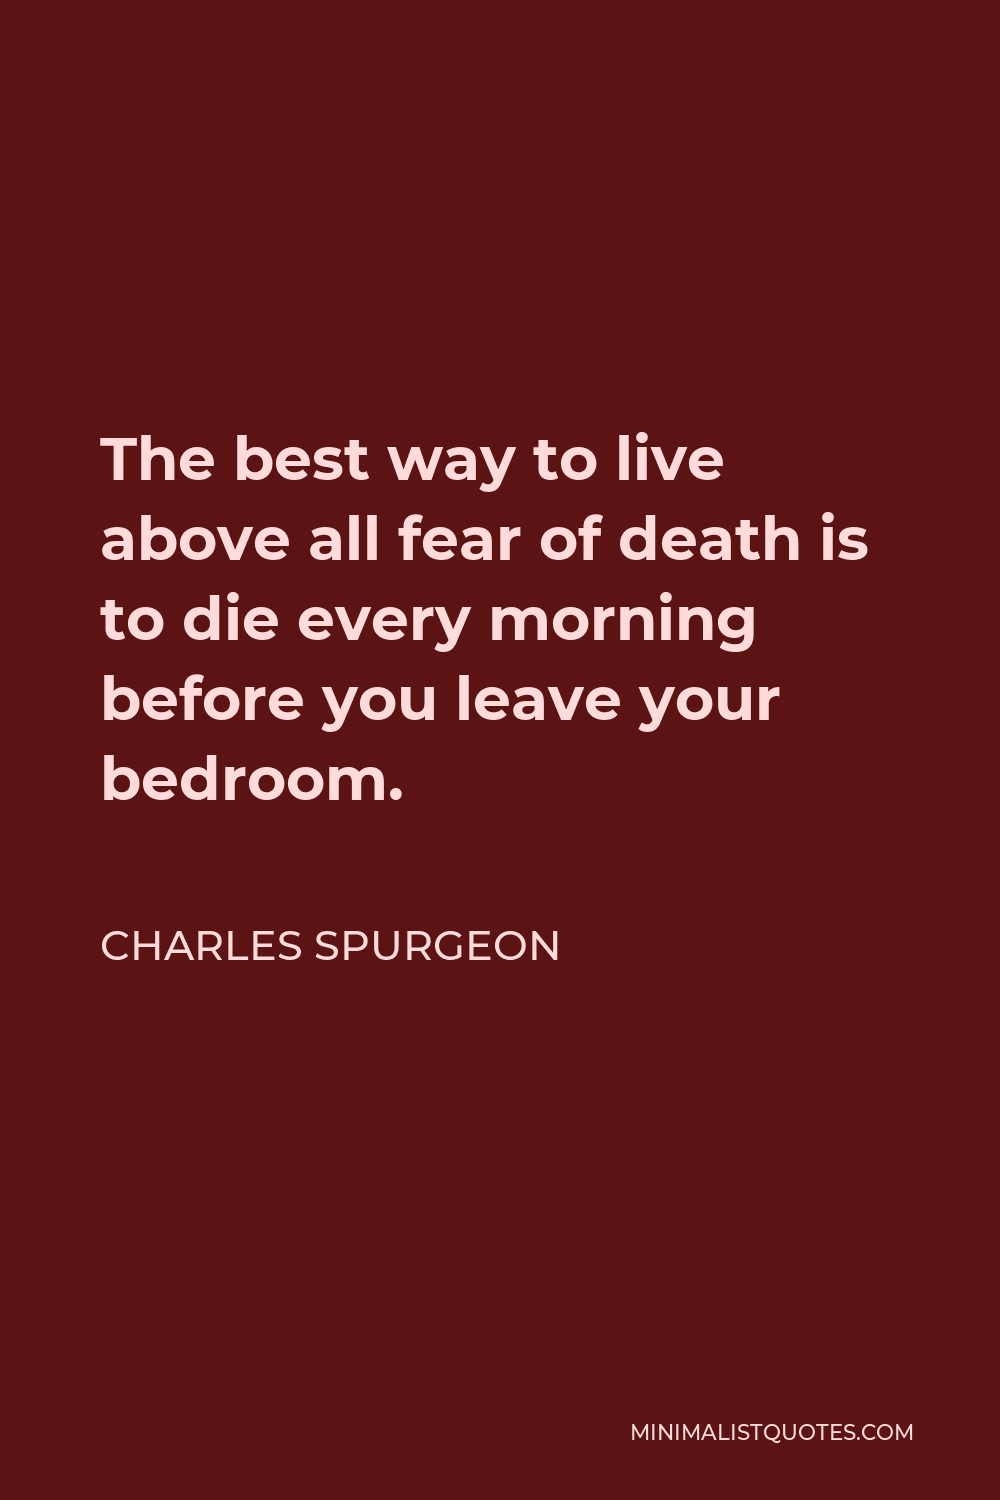 Charles Spurgeon Quote - The best way to live above all fear of death is to die every morning before you leave your bedroom.